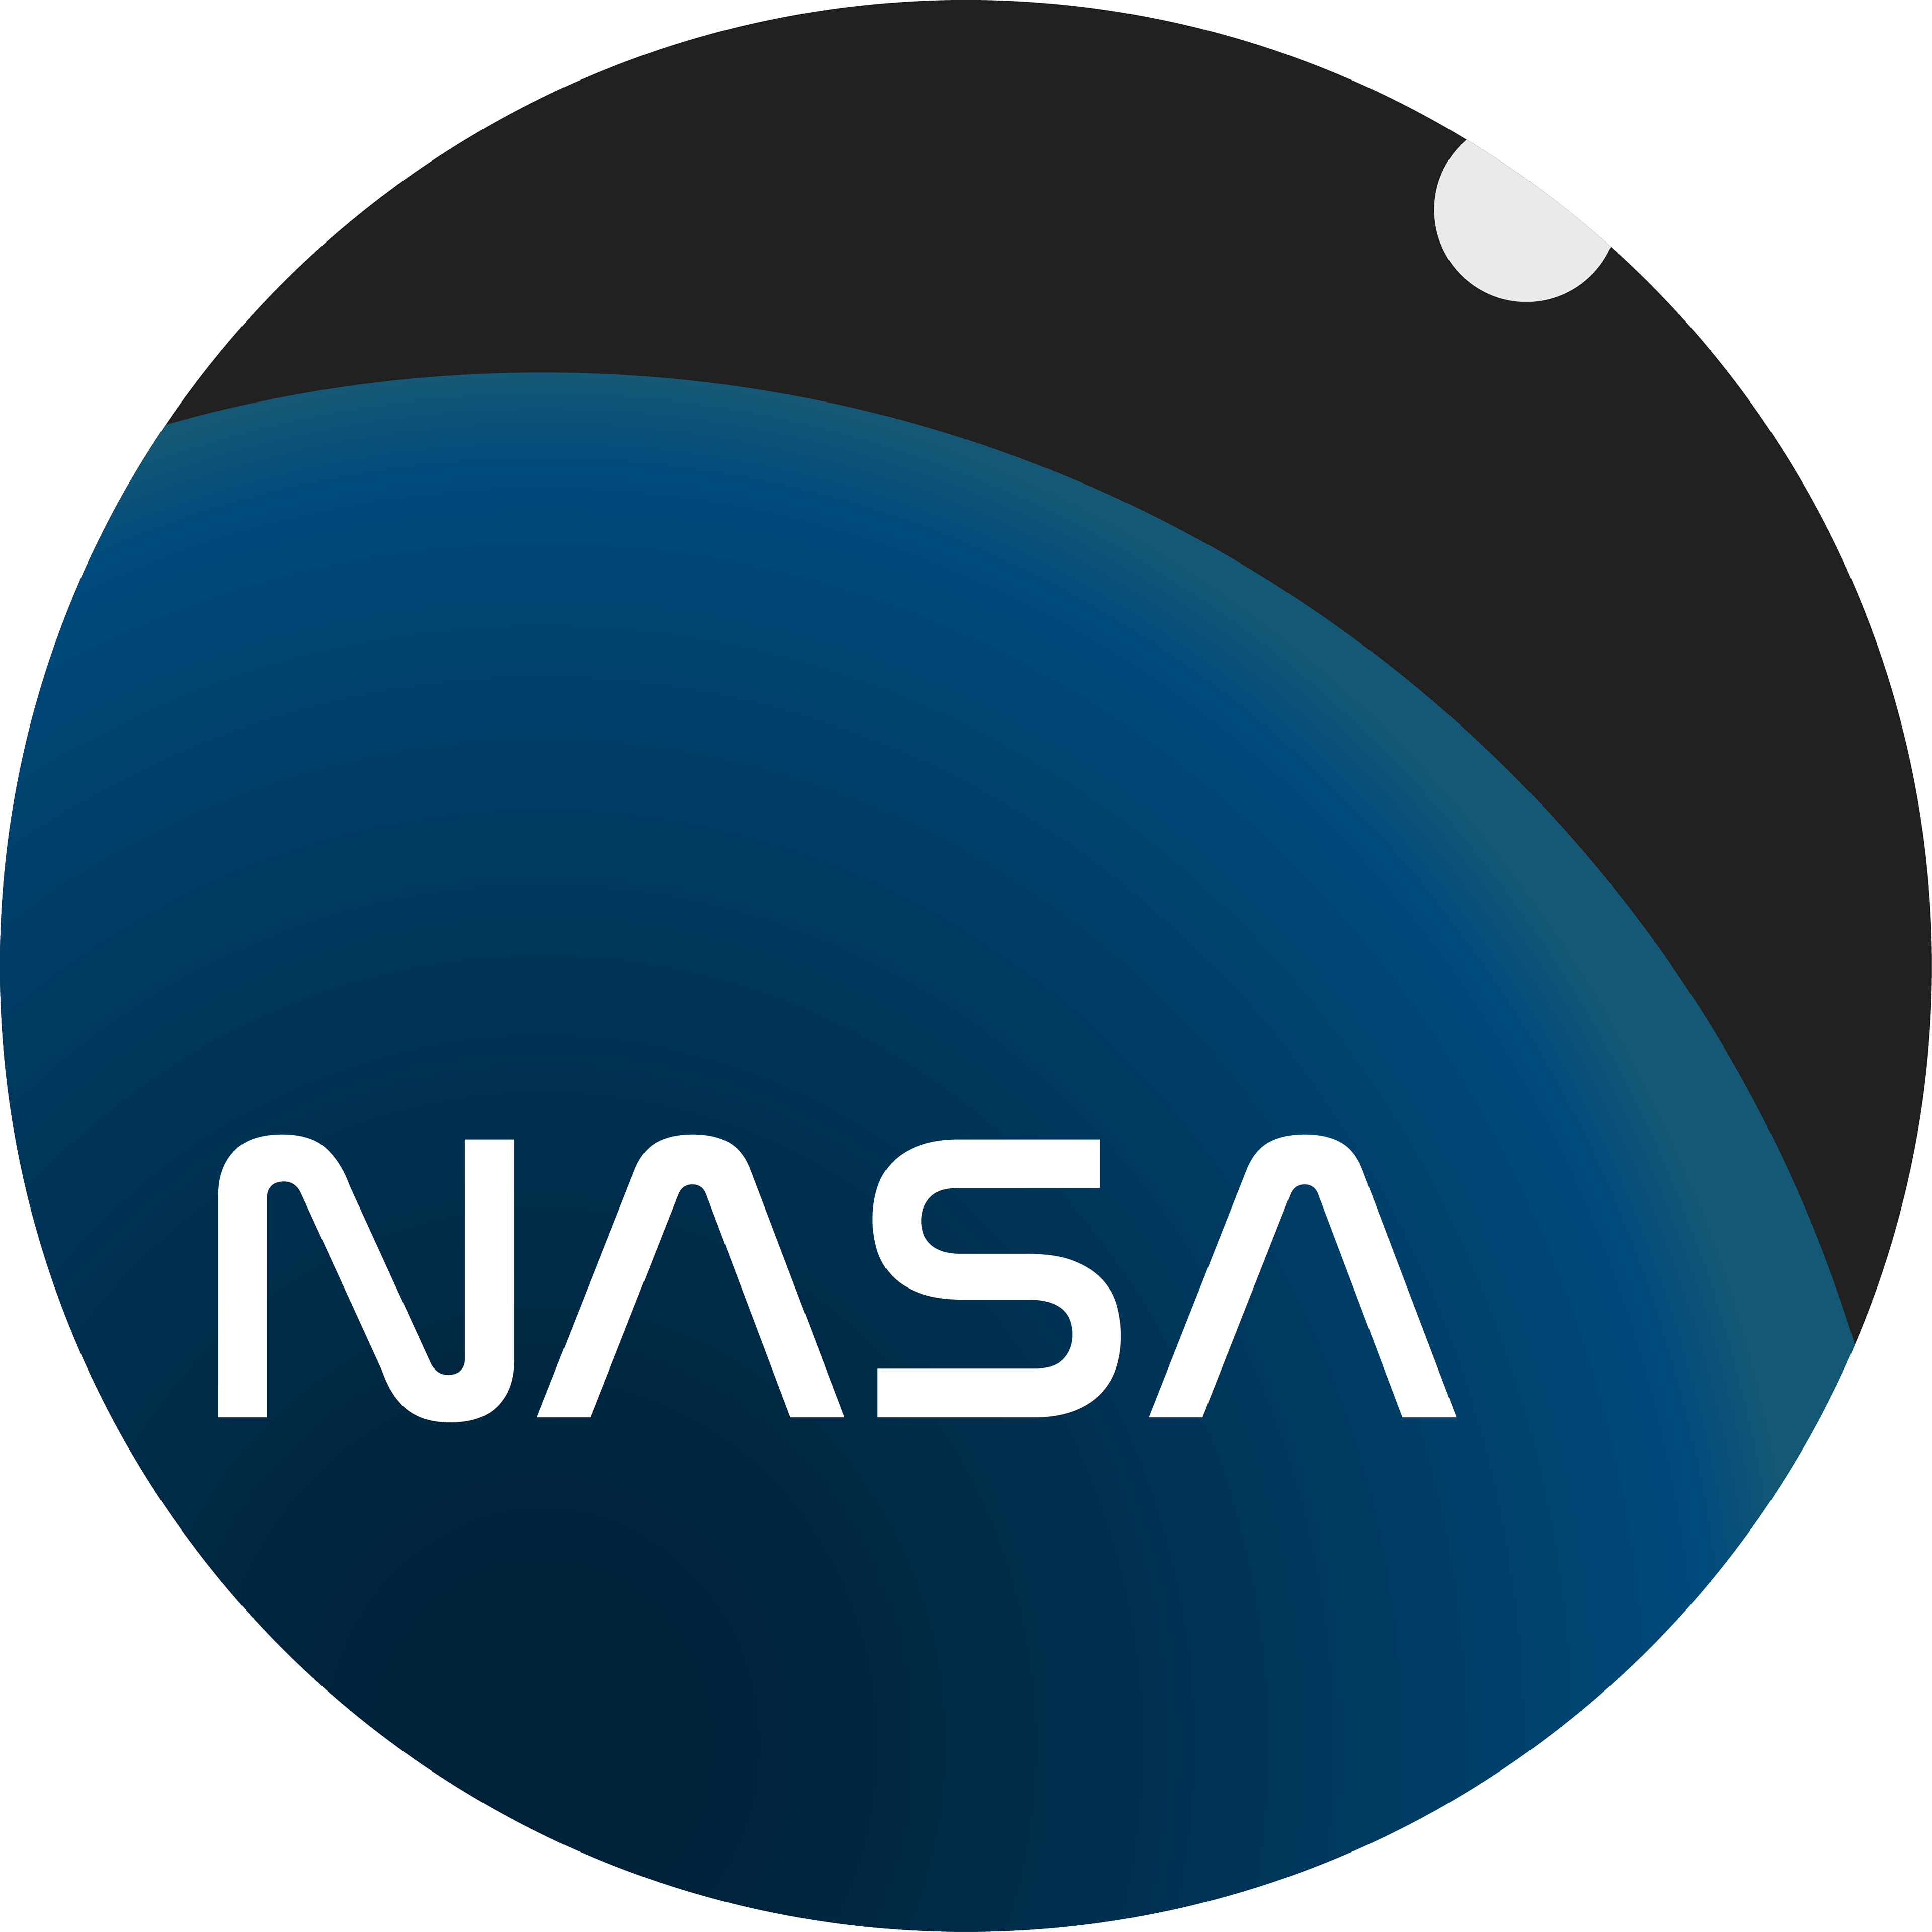 A Logo Of A Space Company